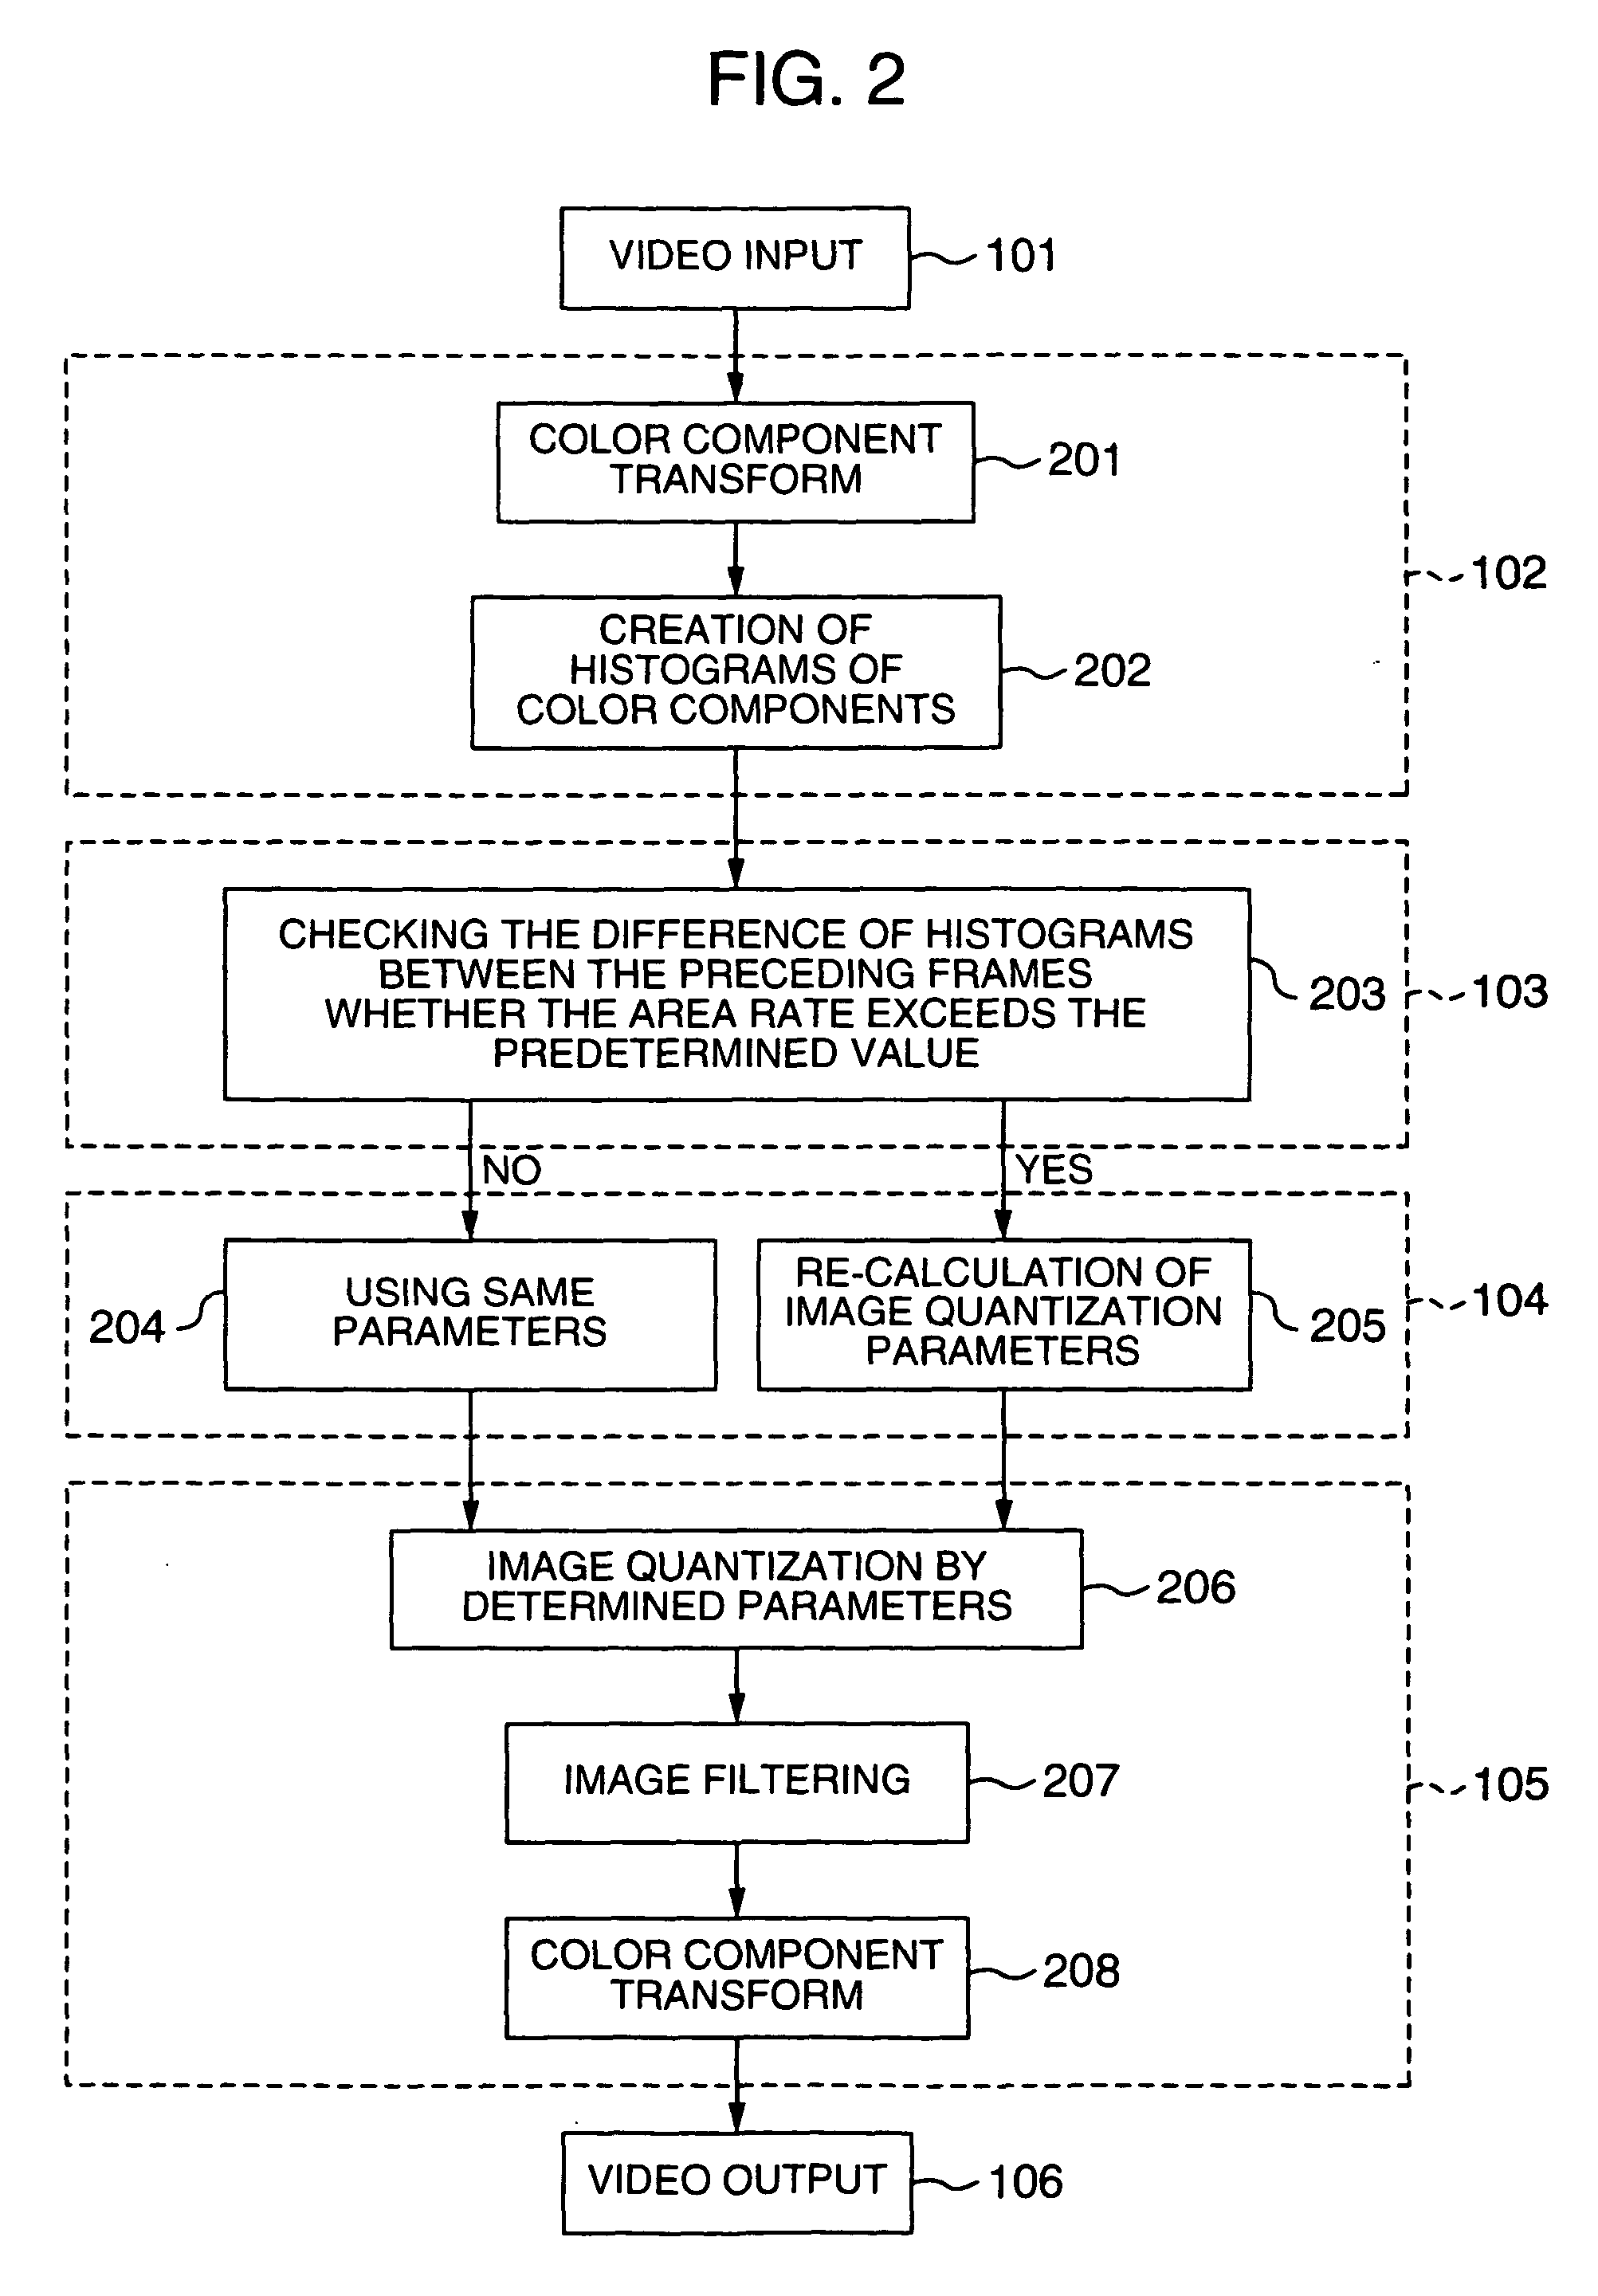 Image processing apparatus, mobile terminal device and image processing computer readable program